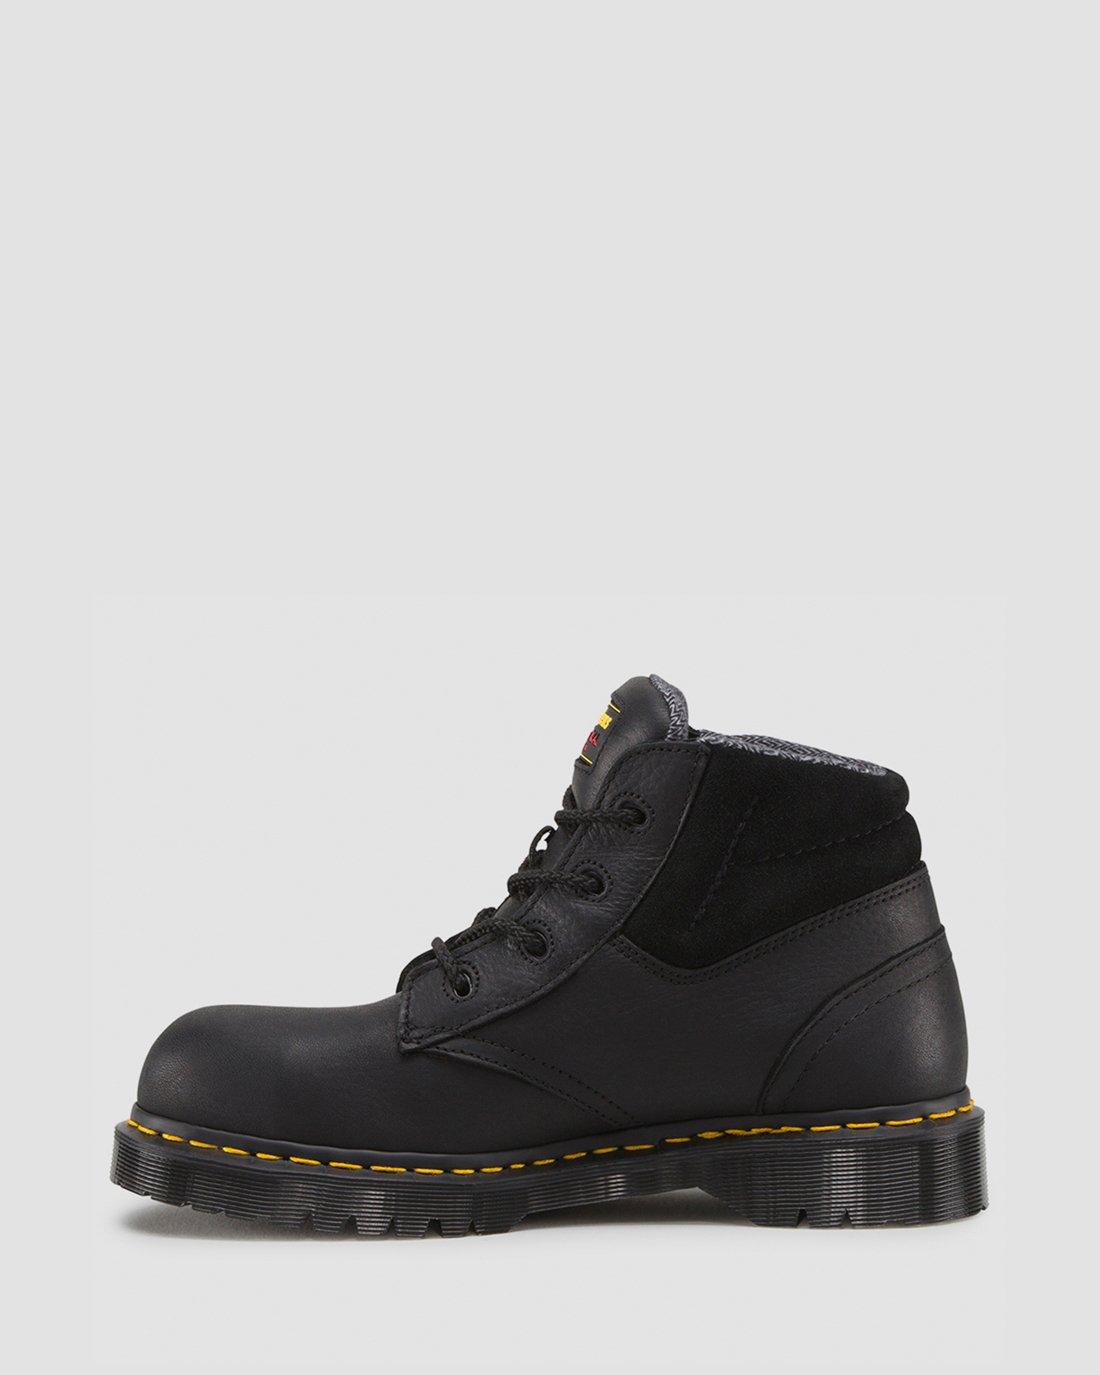 Dr Martens Unisex Steel Toe Industrial Safety Cushioned Lace-Up Boots Black